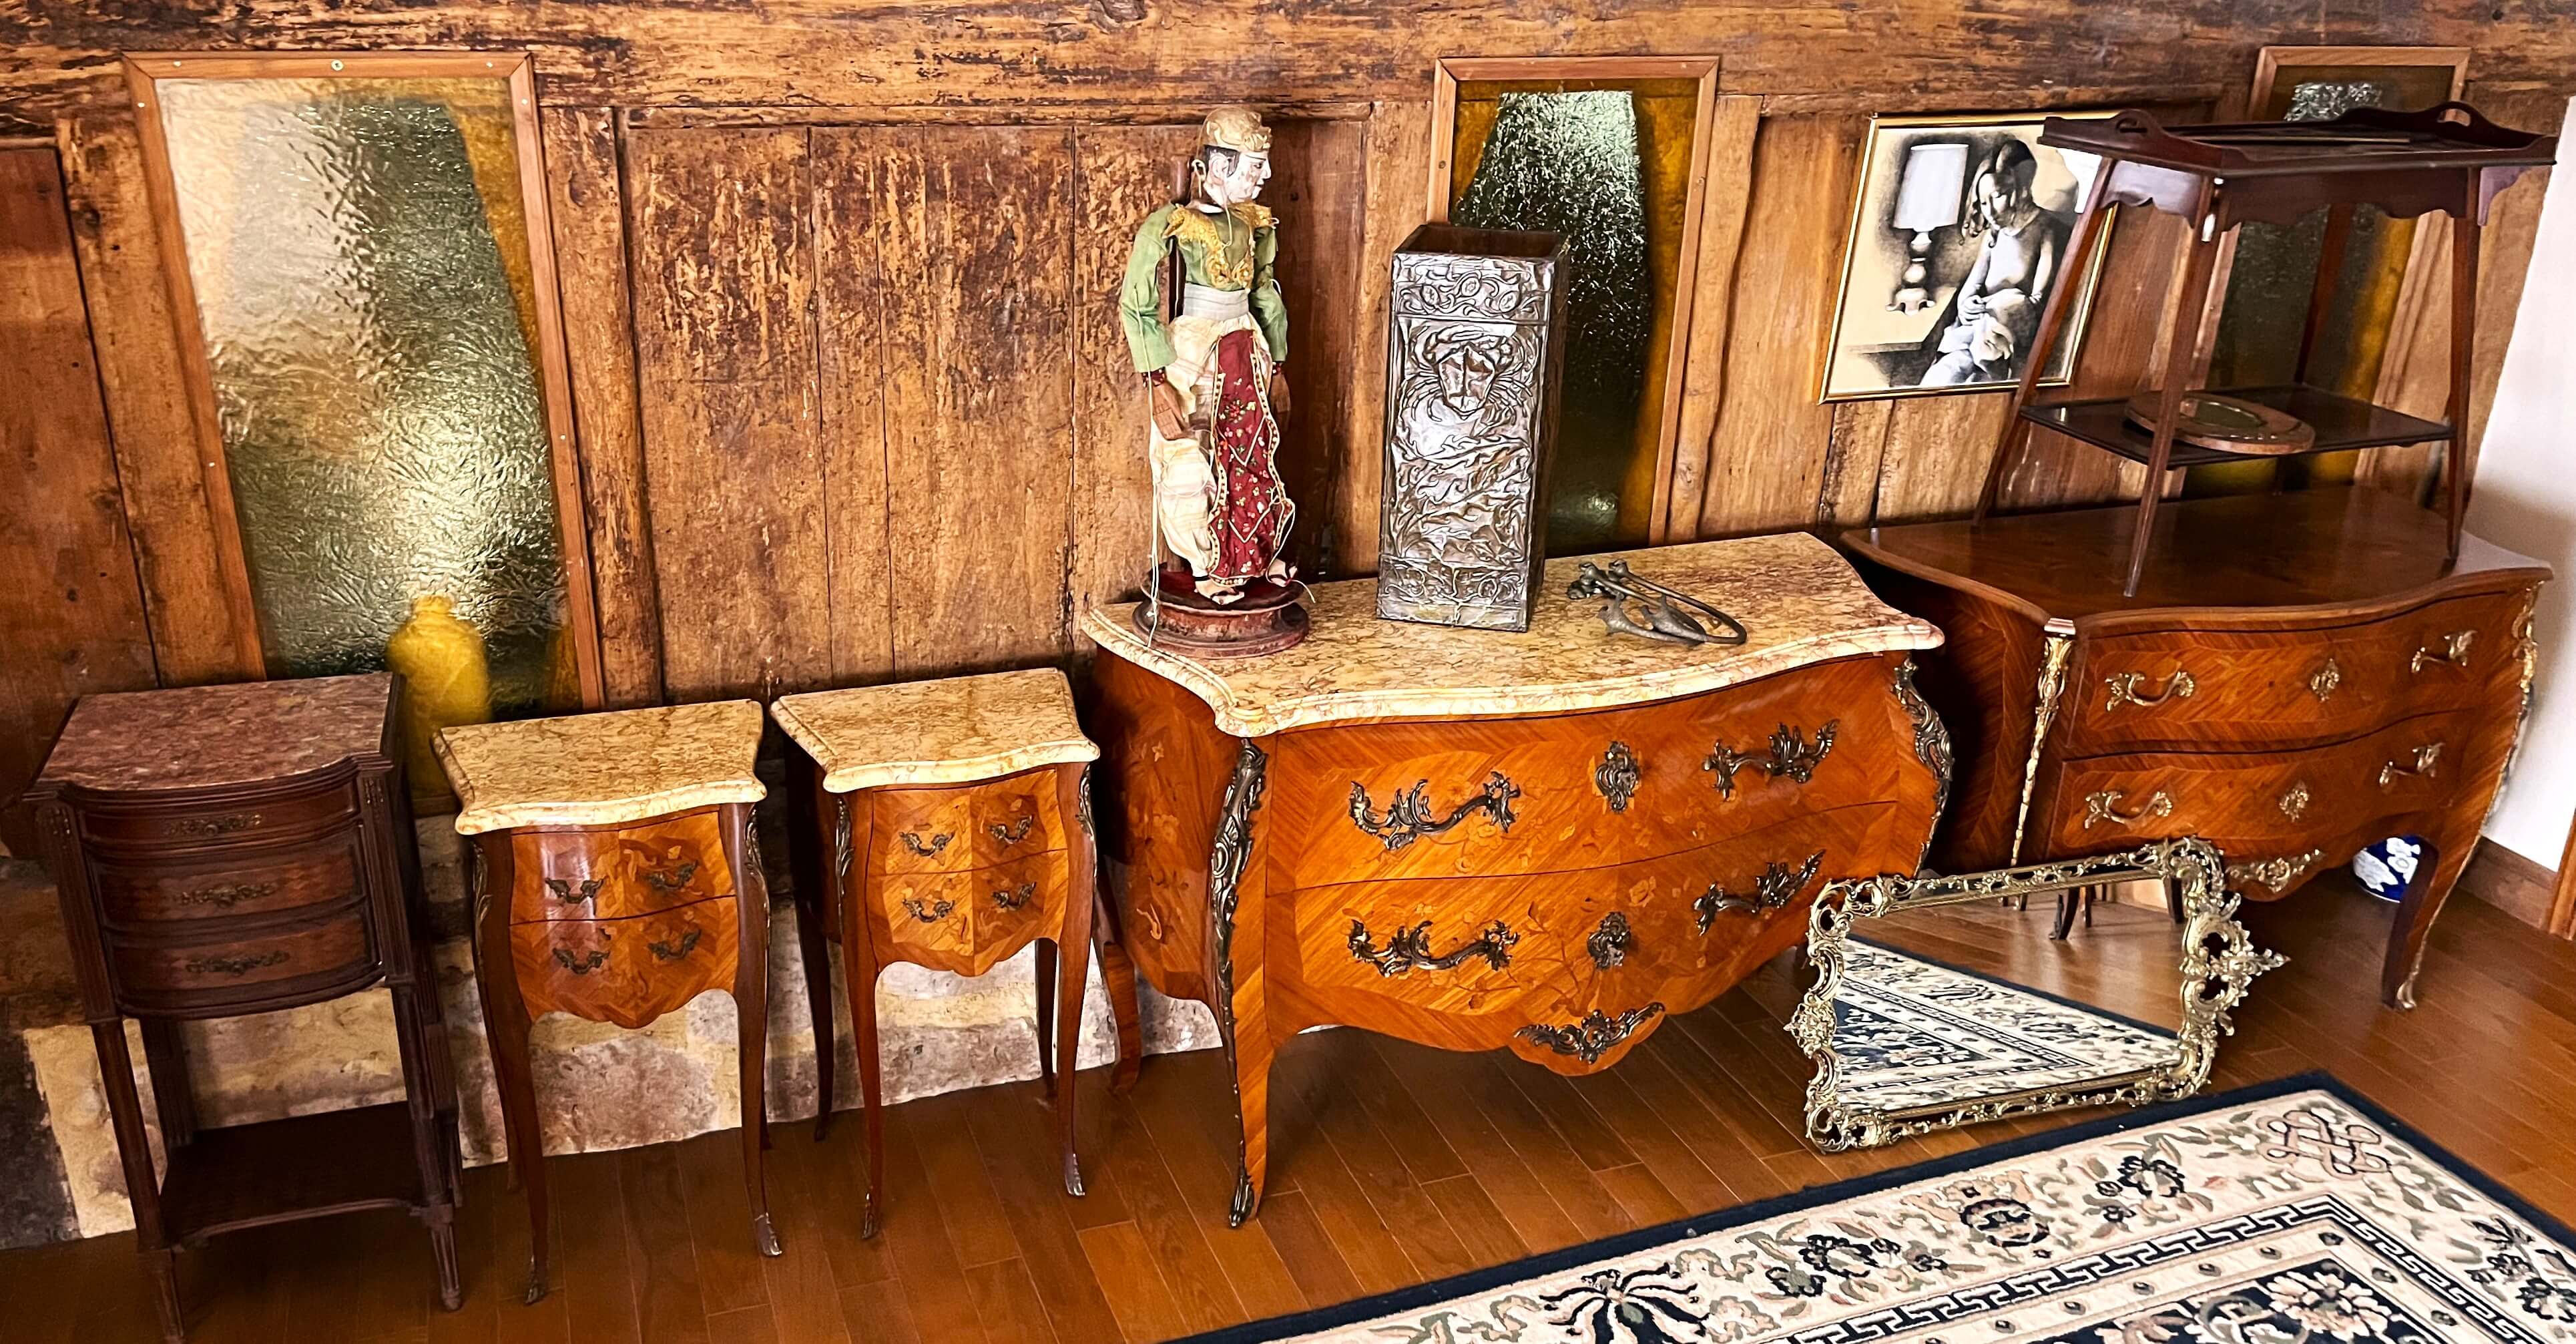 a wooden dresser with a statue on top of it